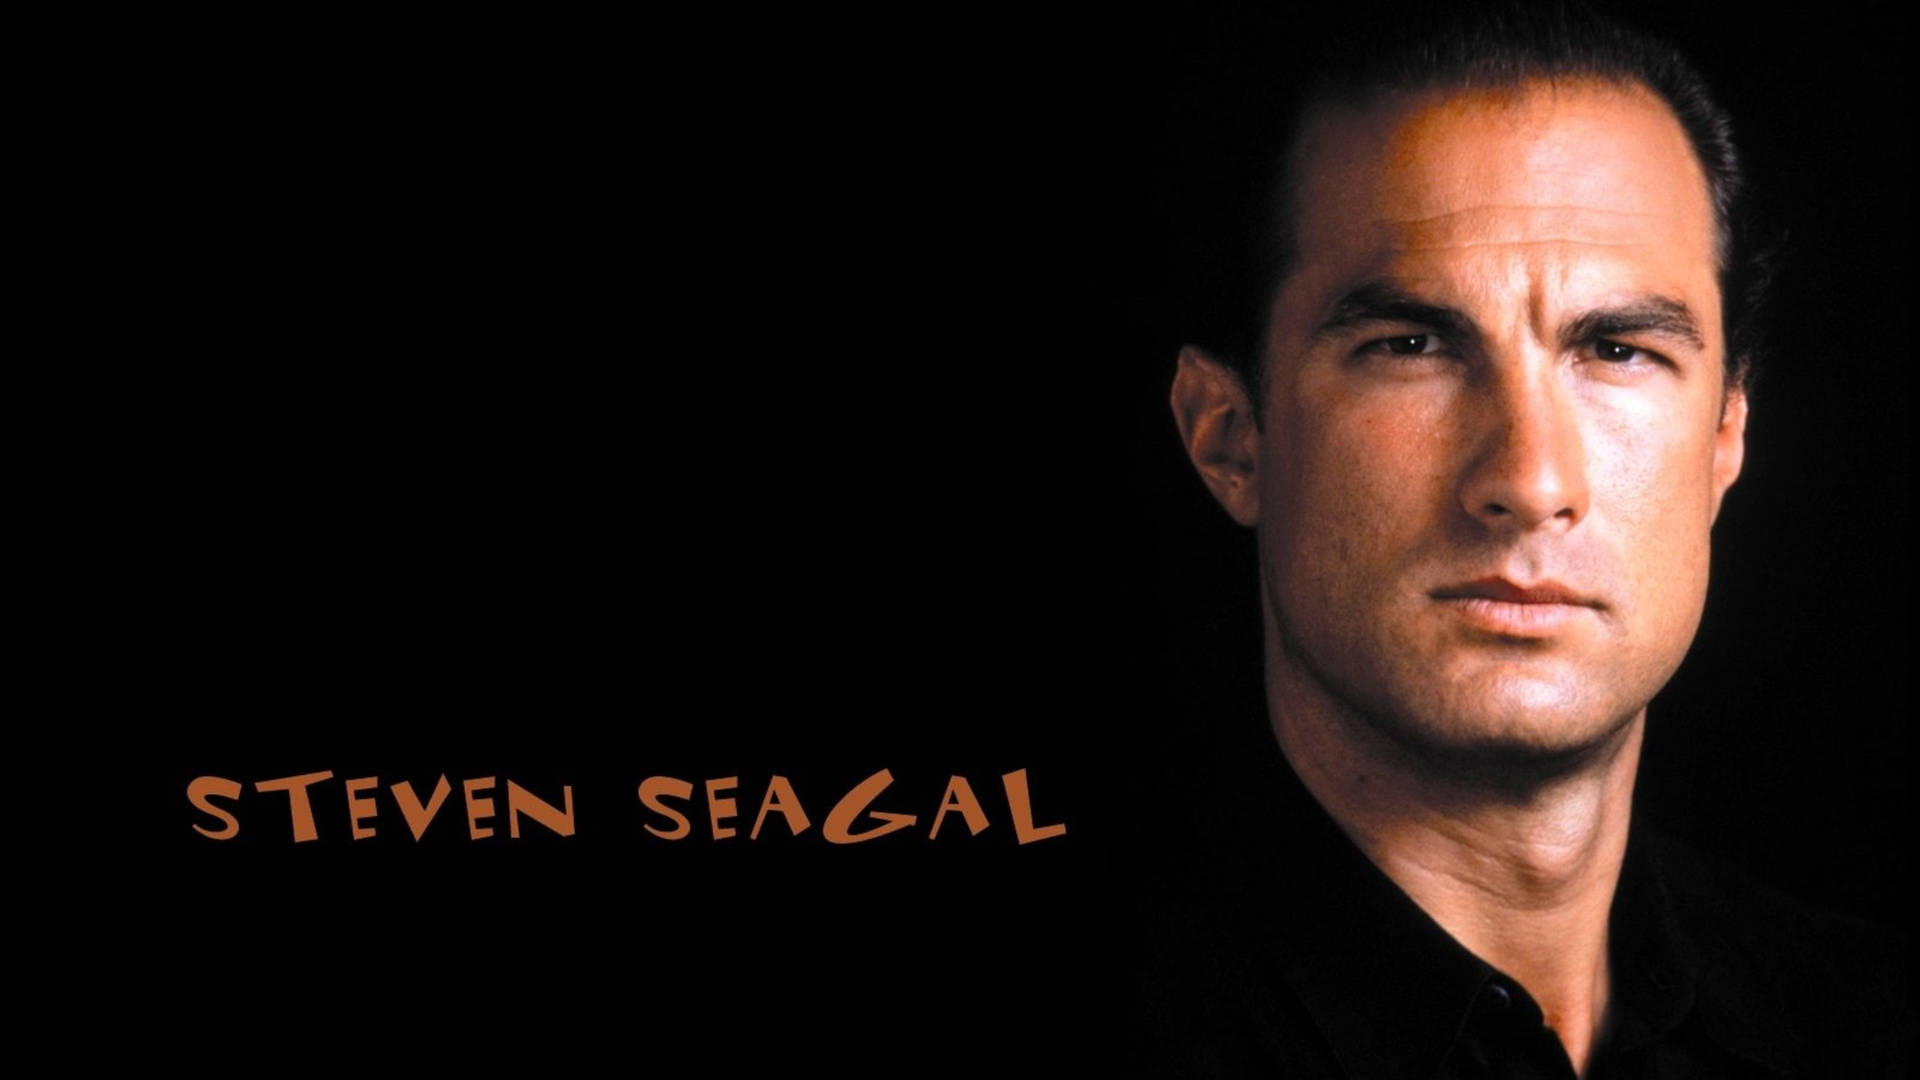 Steven Seagal Name Poster Background